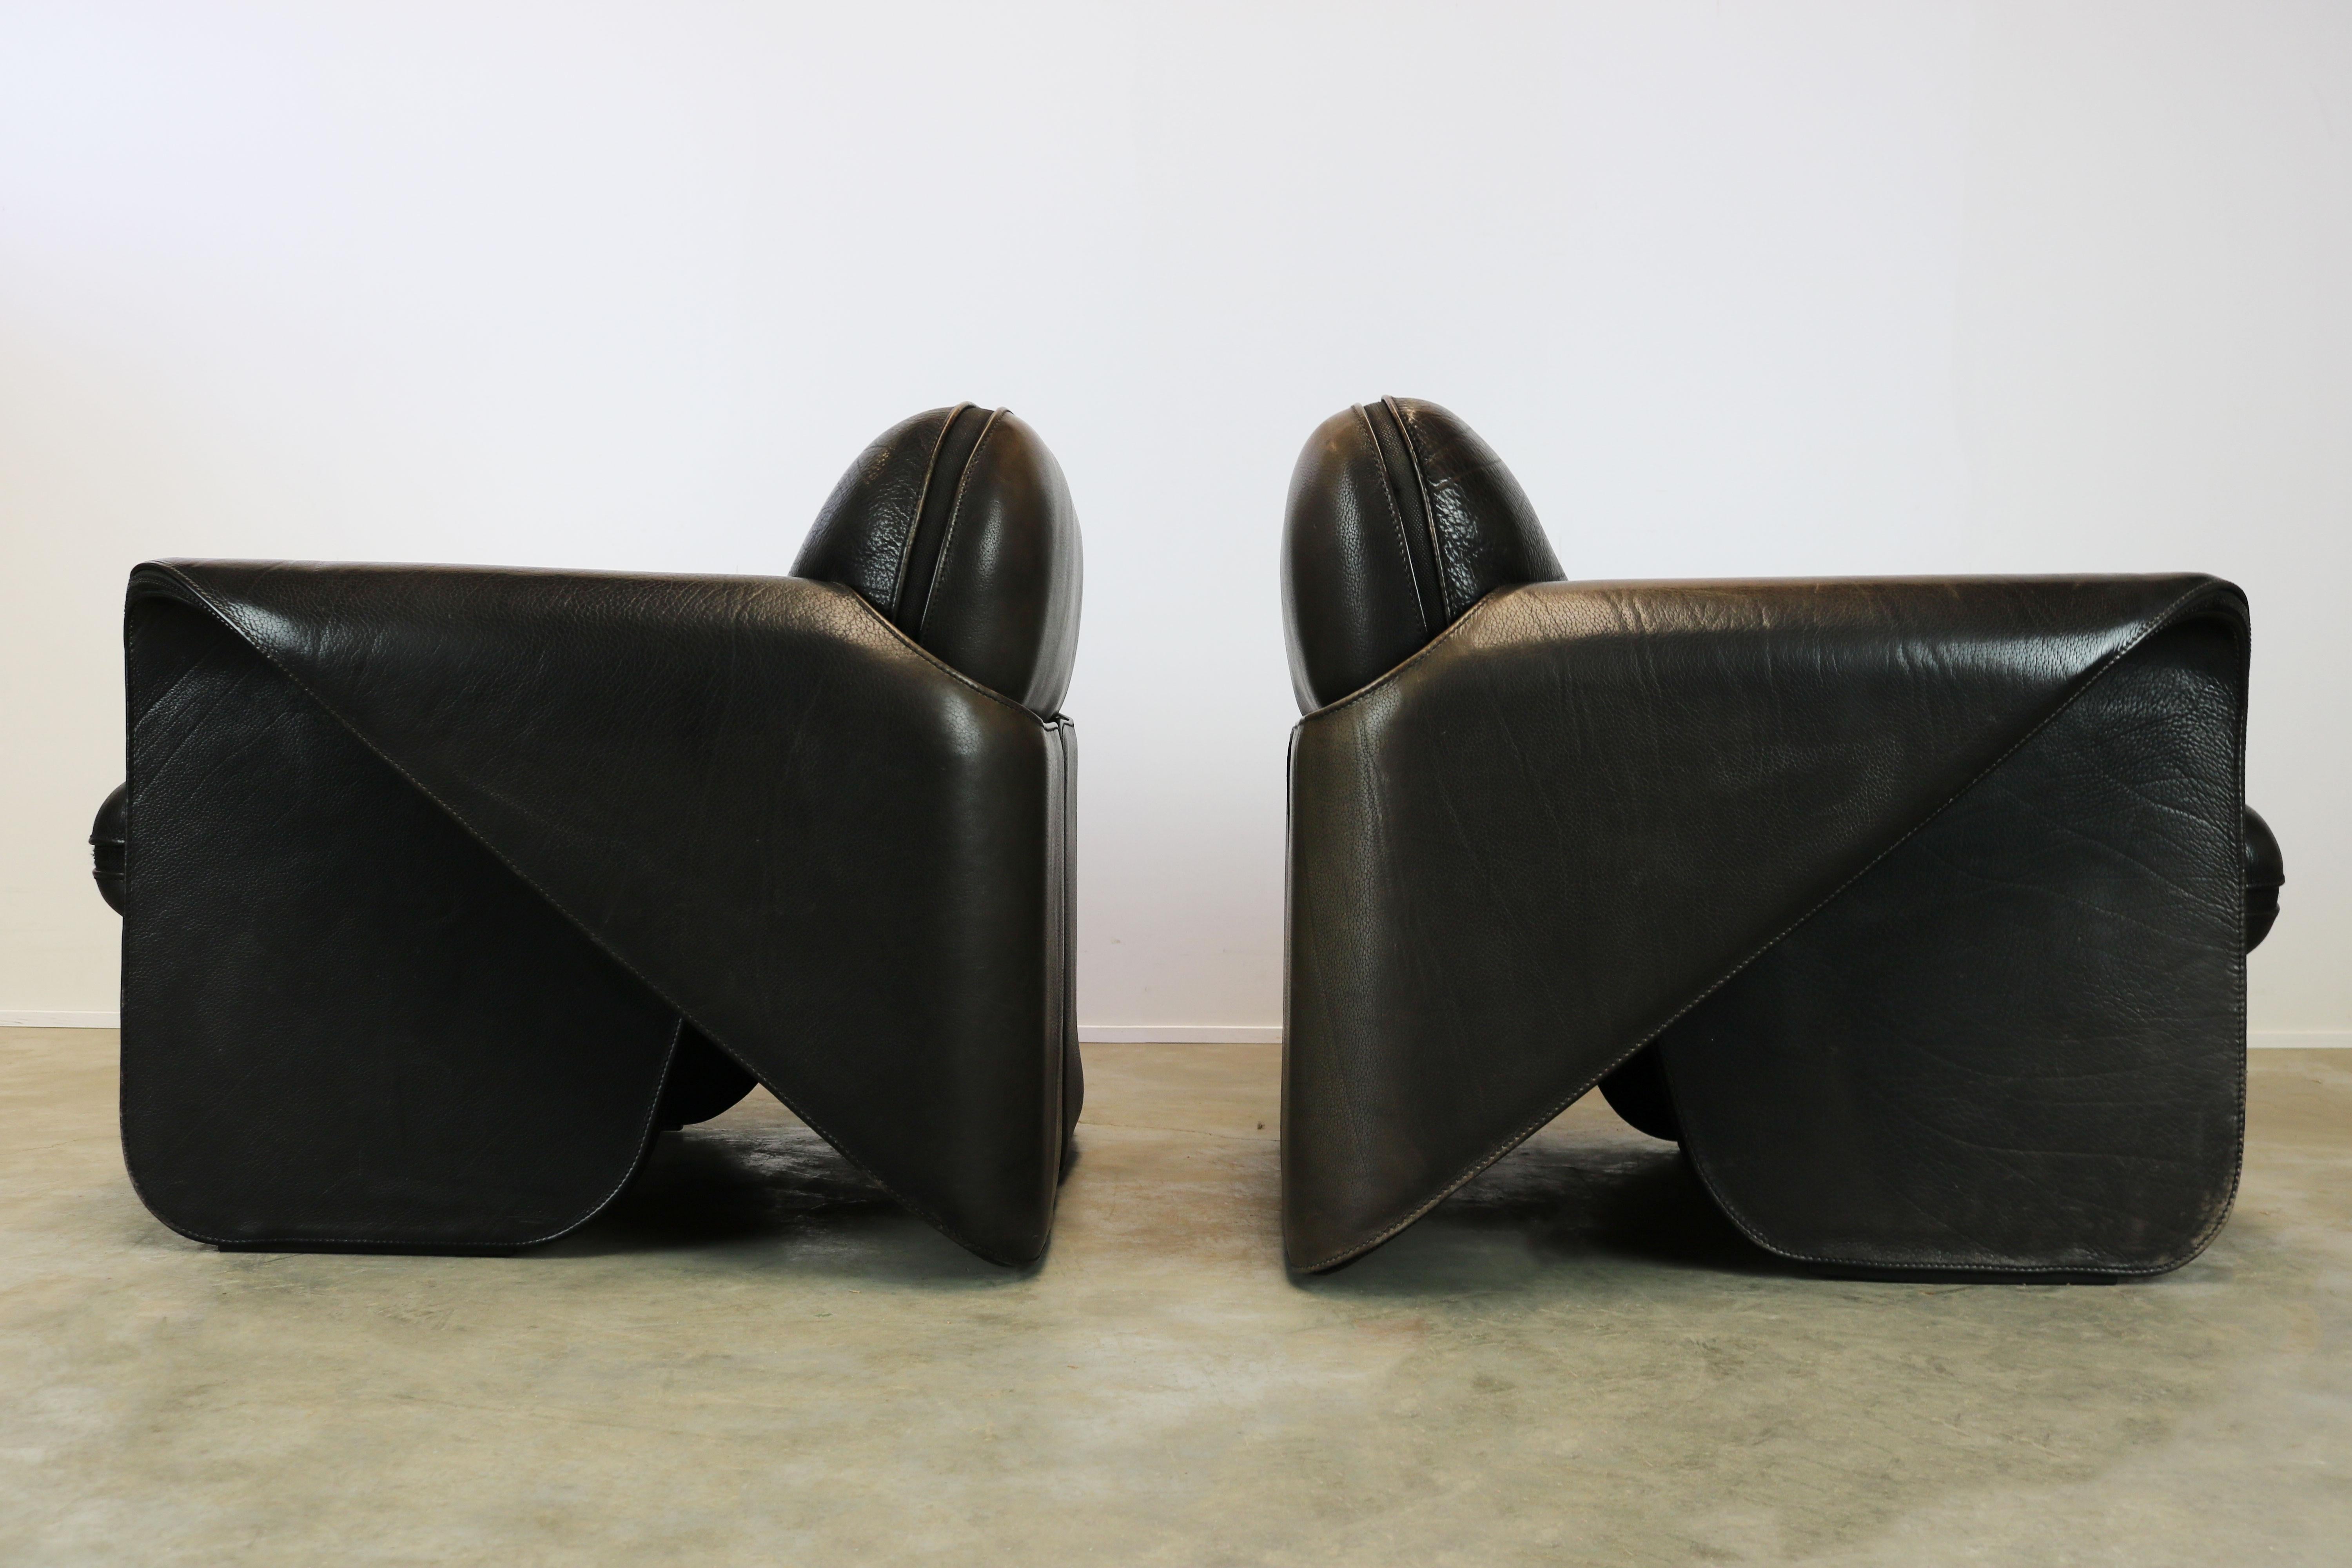 Rare Pair of Swiss De Sede Ds 125 Lounge Chairs by Gerd Lange 1978 Black Leather 6